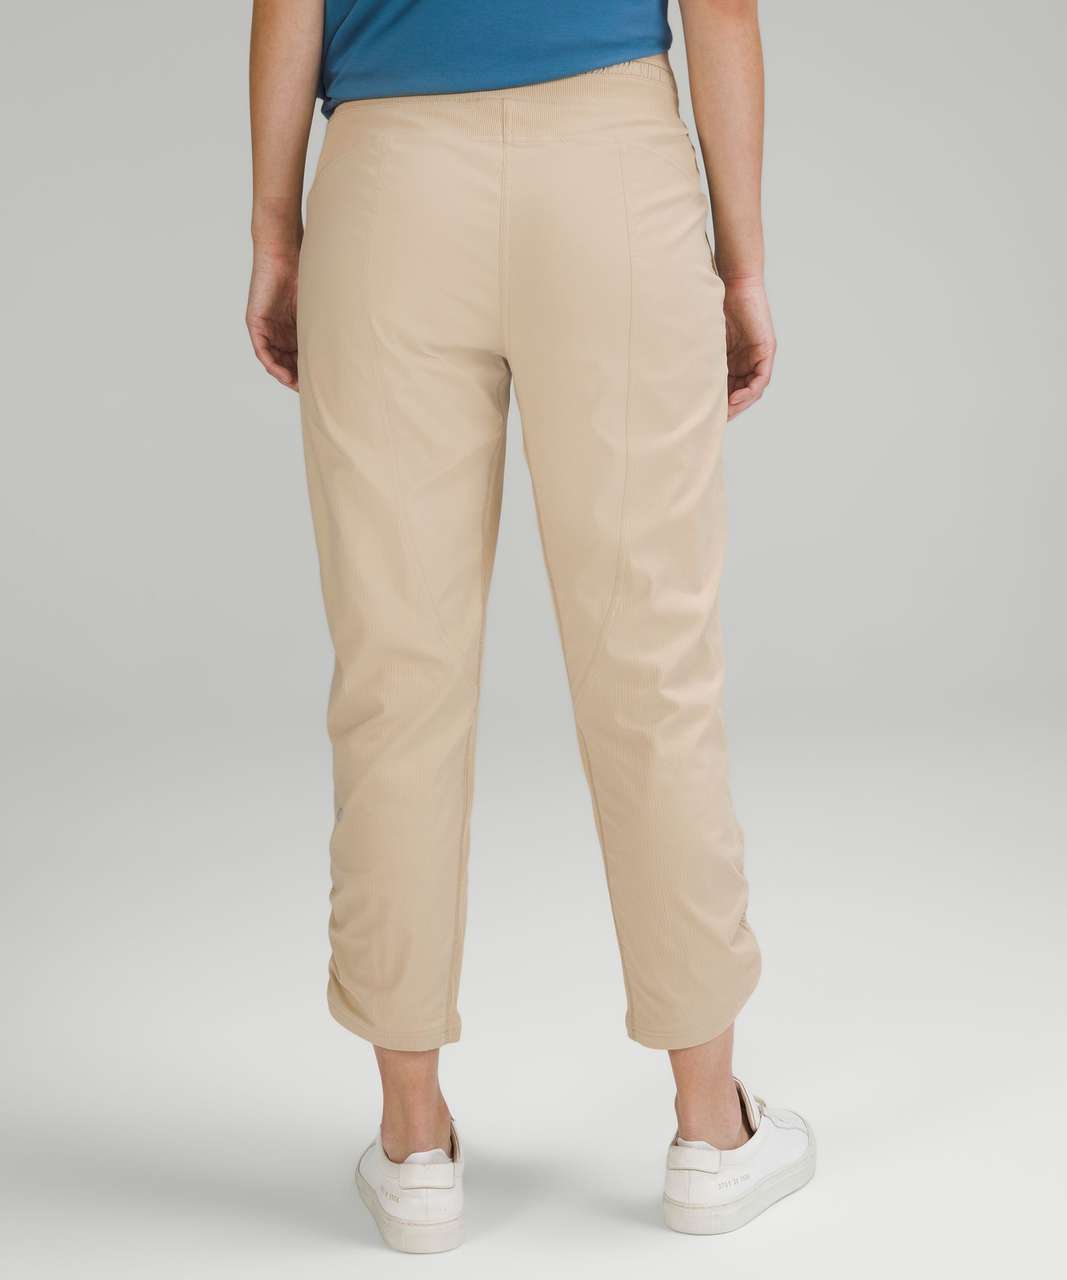 Lululemon Dance Studio Mid-Rise Lined Cropped Pants - Trench